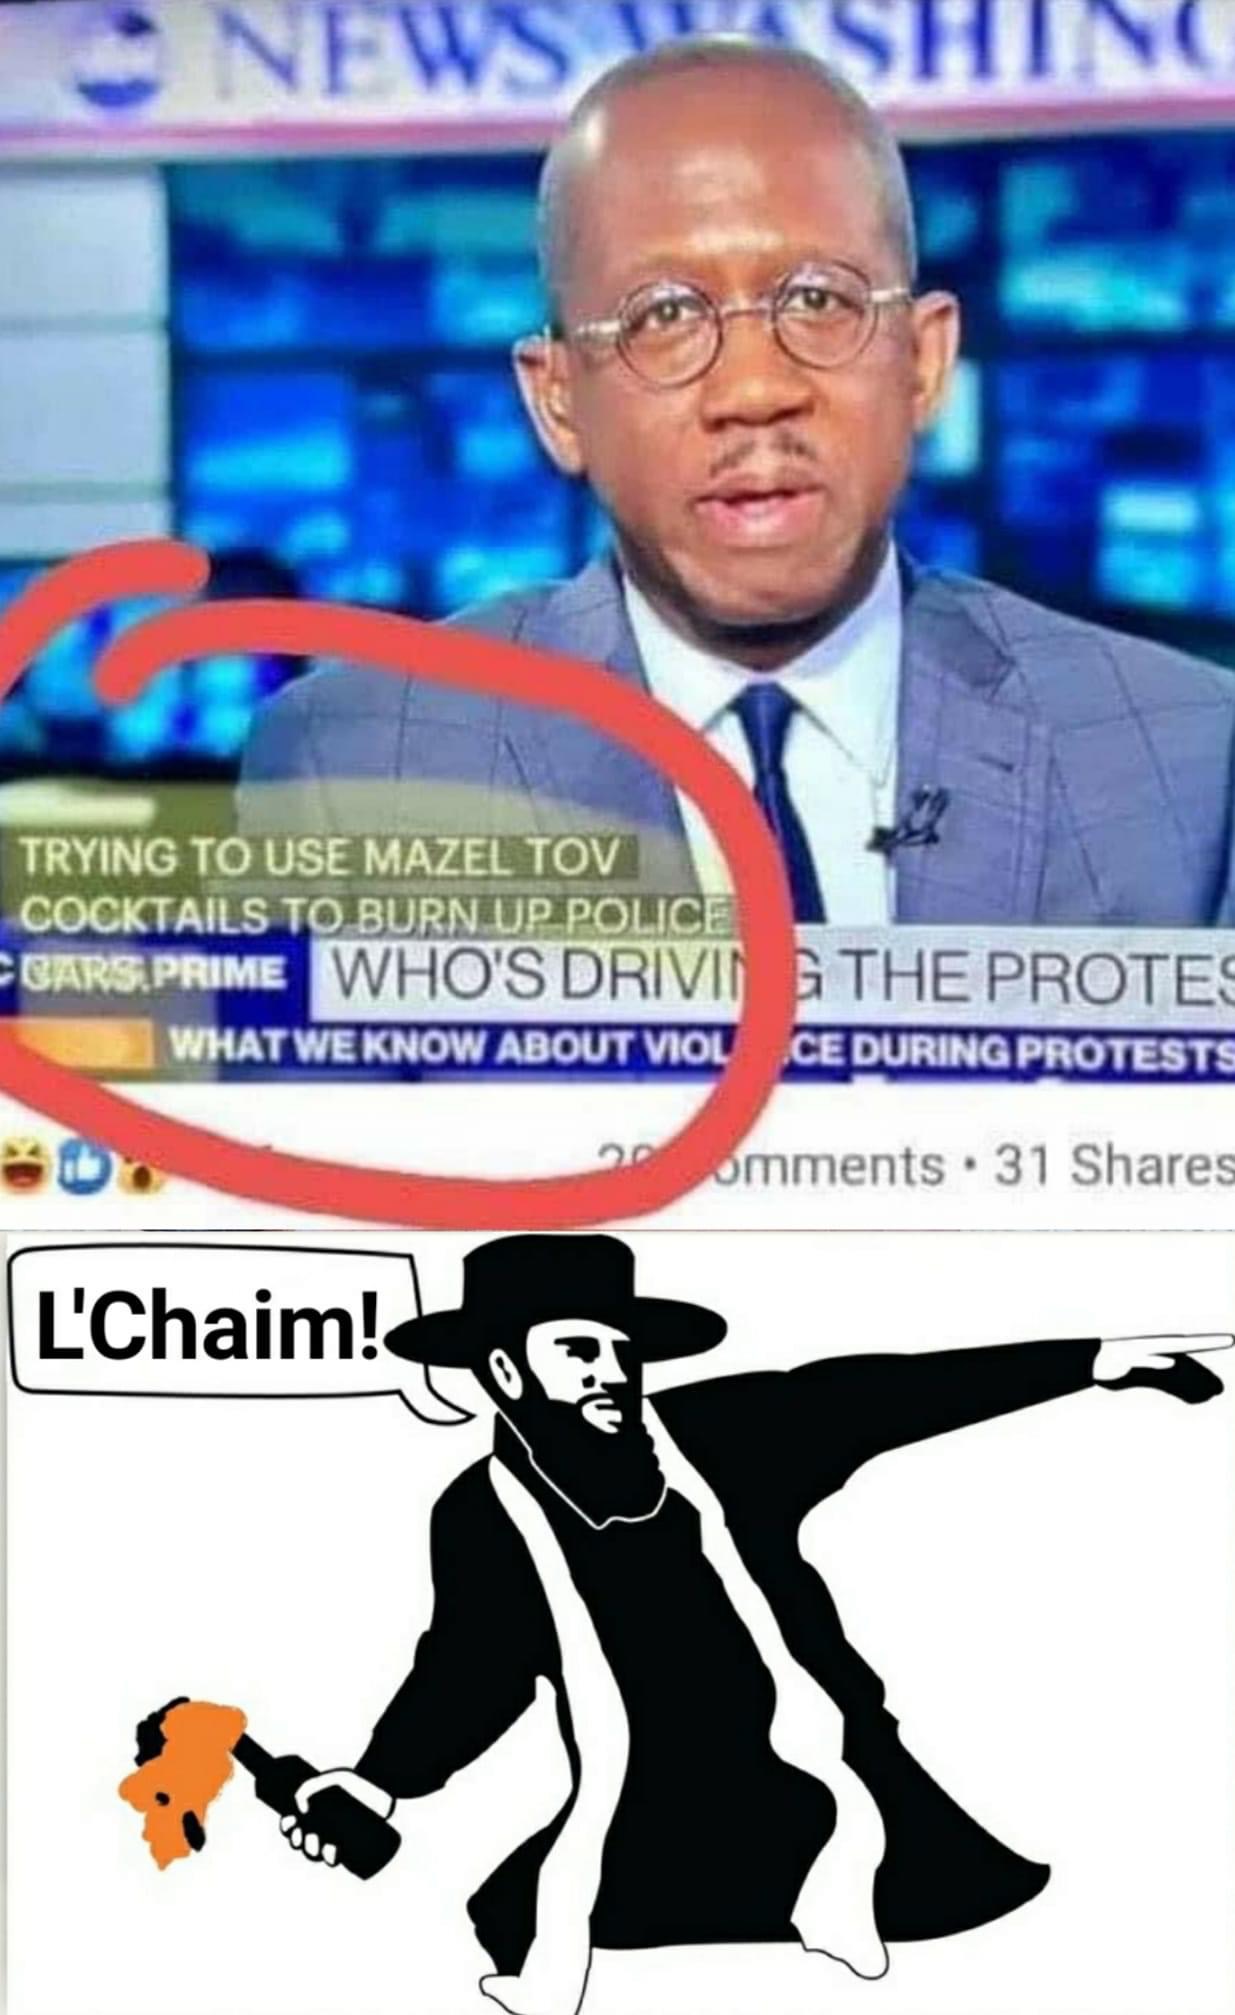 mazel tov cocktail meme - News Trying To Use Mazel Tov Cocktails To Burn Up Police Cbars Prime Who'S Drivii G The Protes What We Know About Violce During Protests 2omments. 31 L'Chaim!